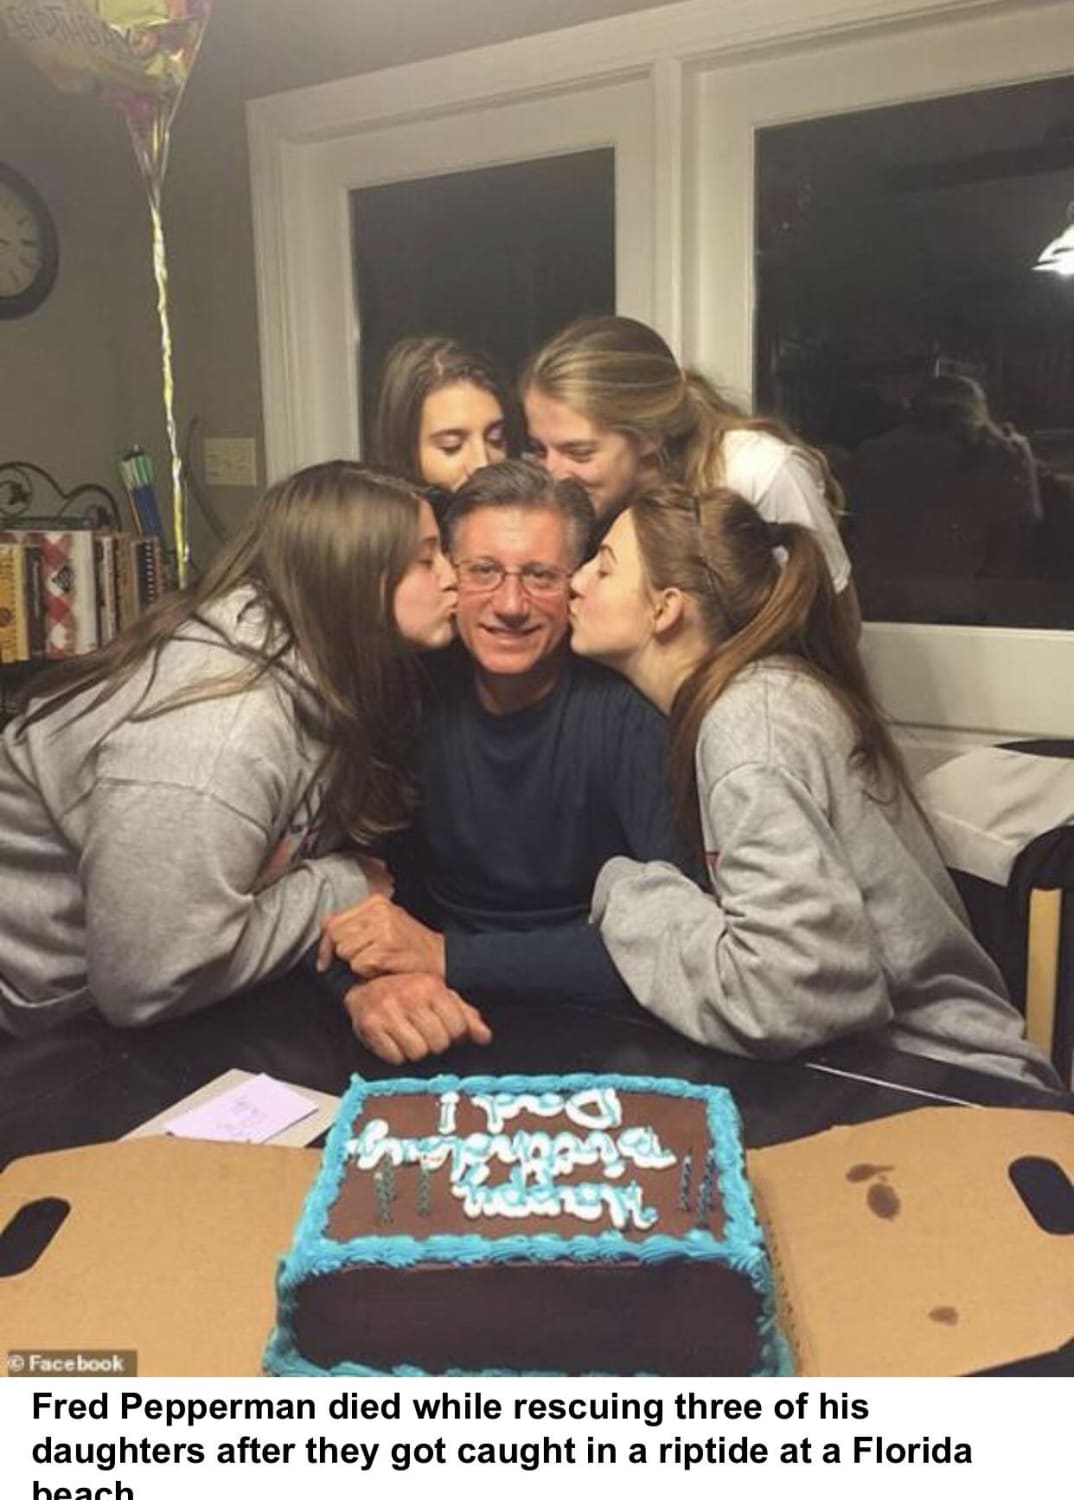 Fred Pepperman died to save his three daughters, rescuing them from a ripe tide before drowning himself. His last words to them were “I got you”.